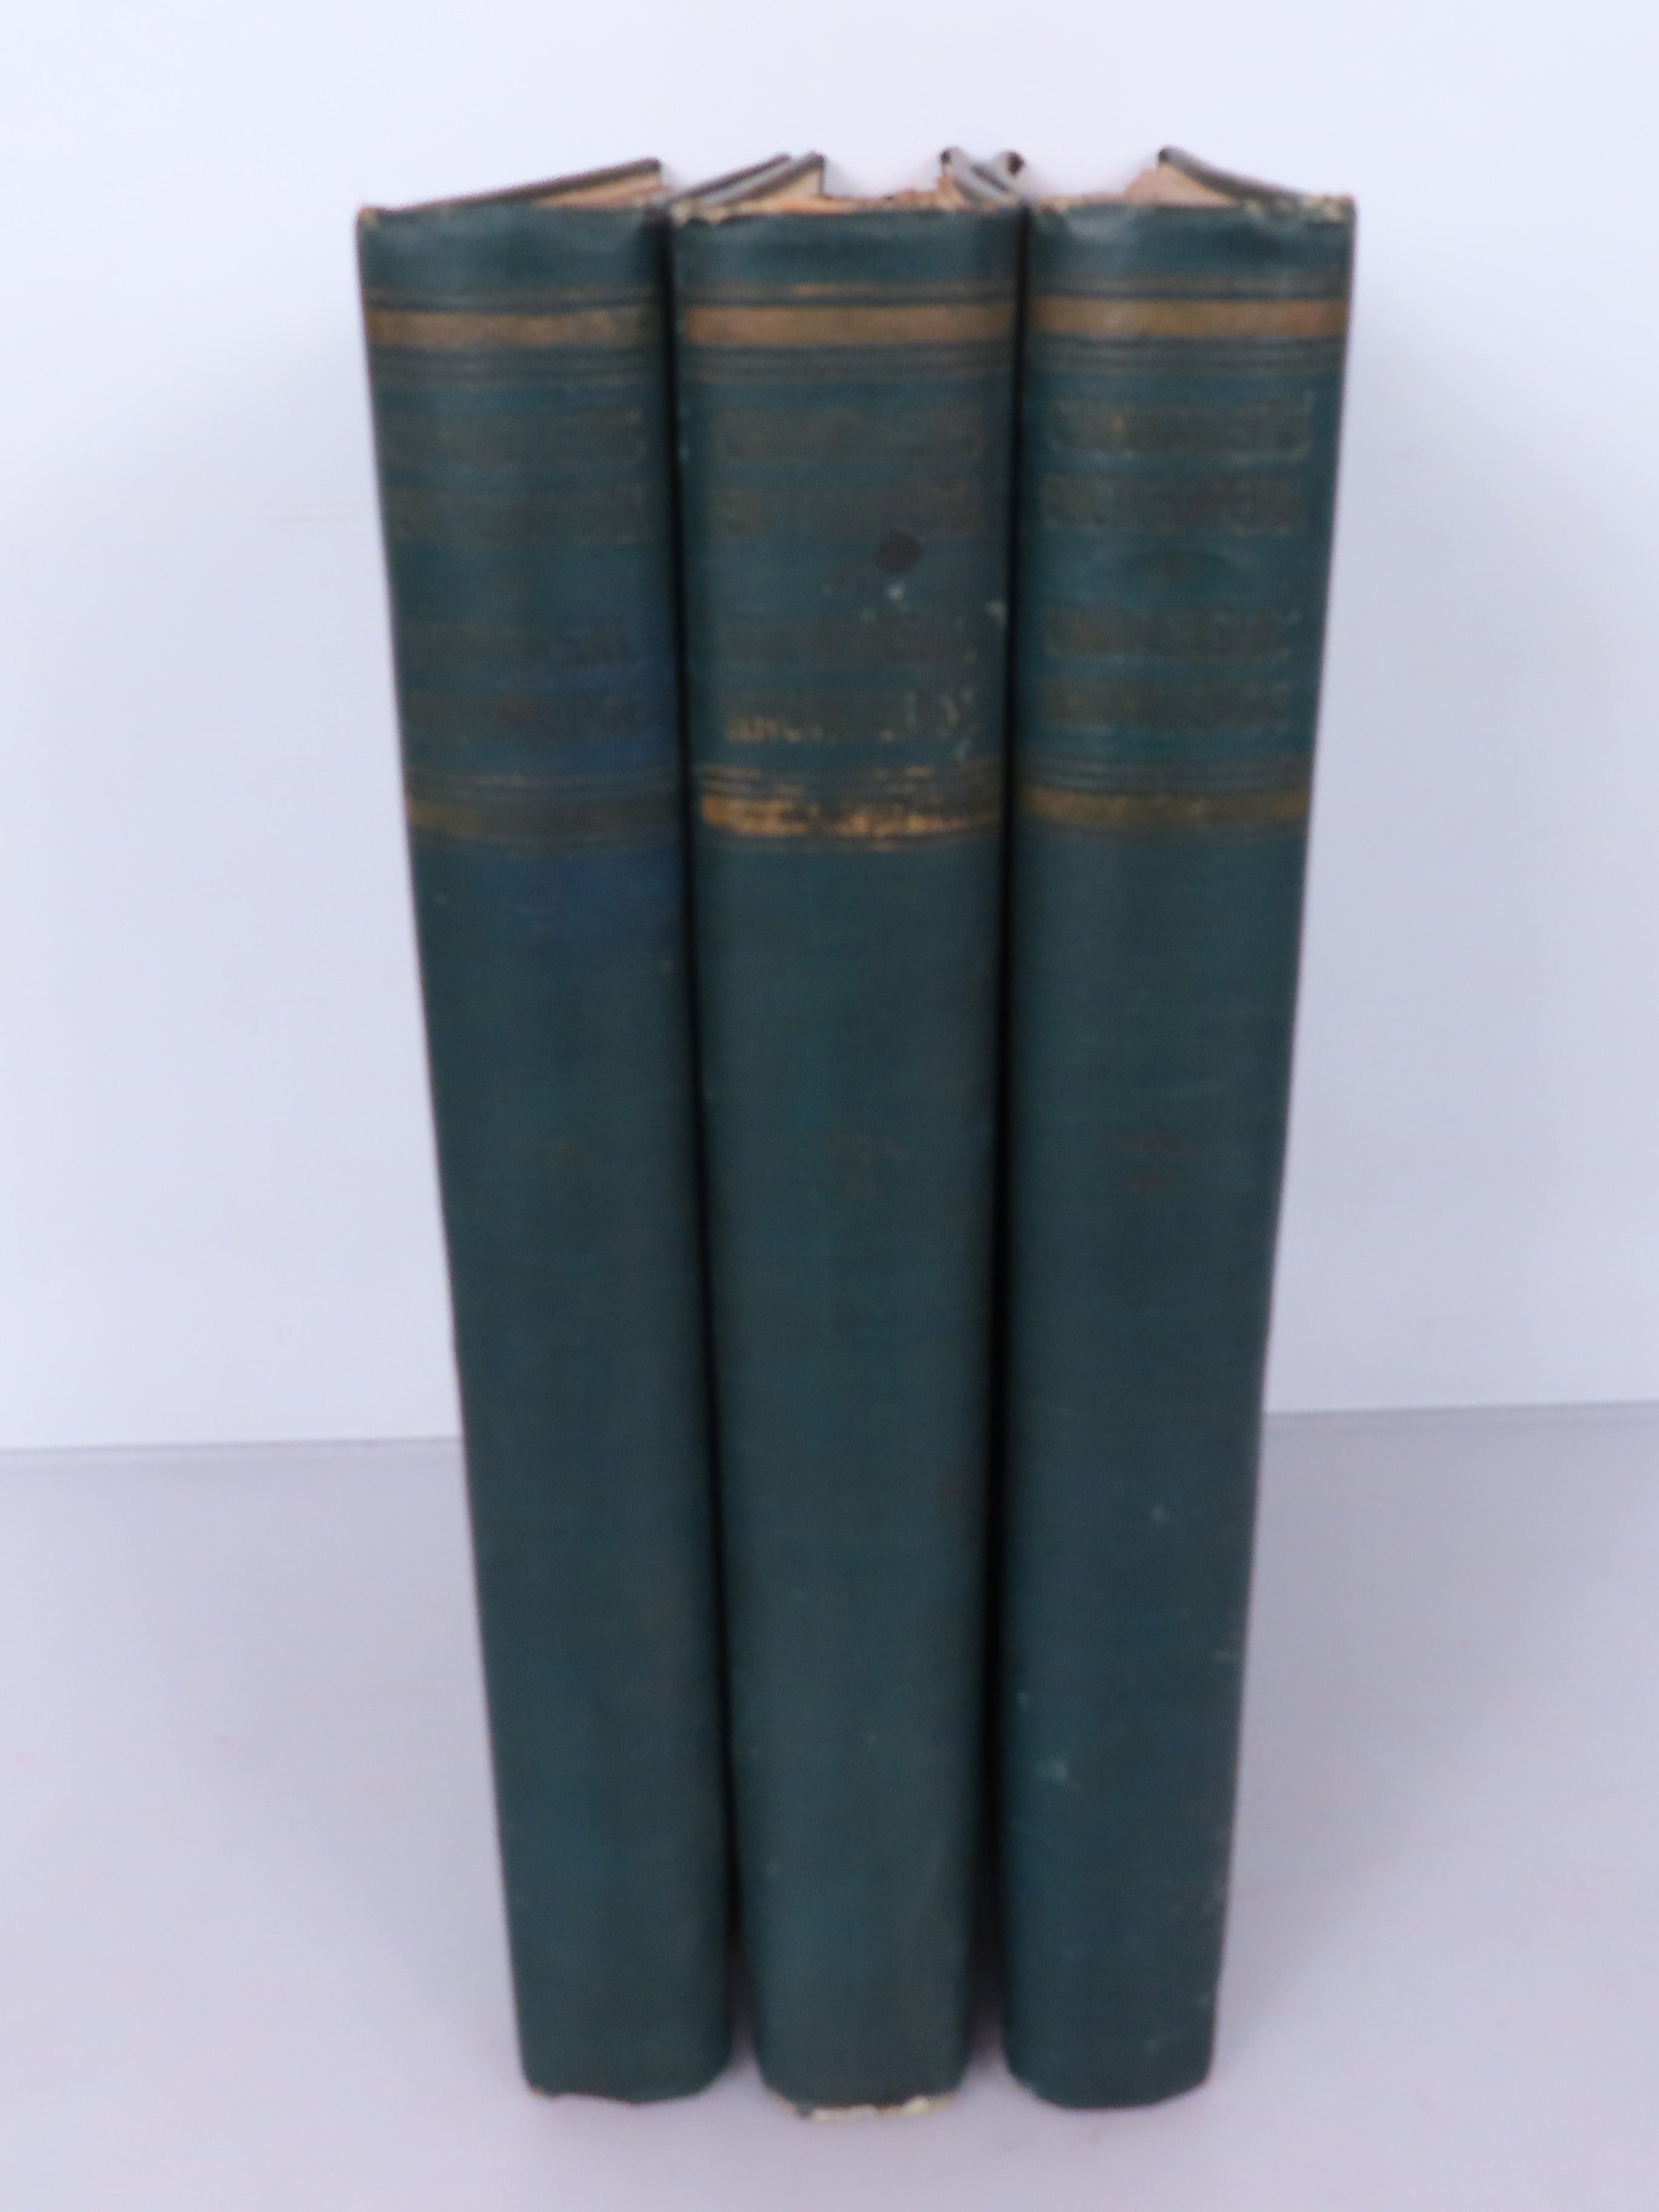 Chandler's Encyclopedia: An Epitome of Universal Knowledge Vol 1-3 1898